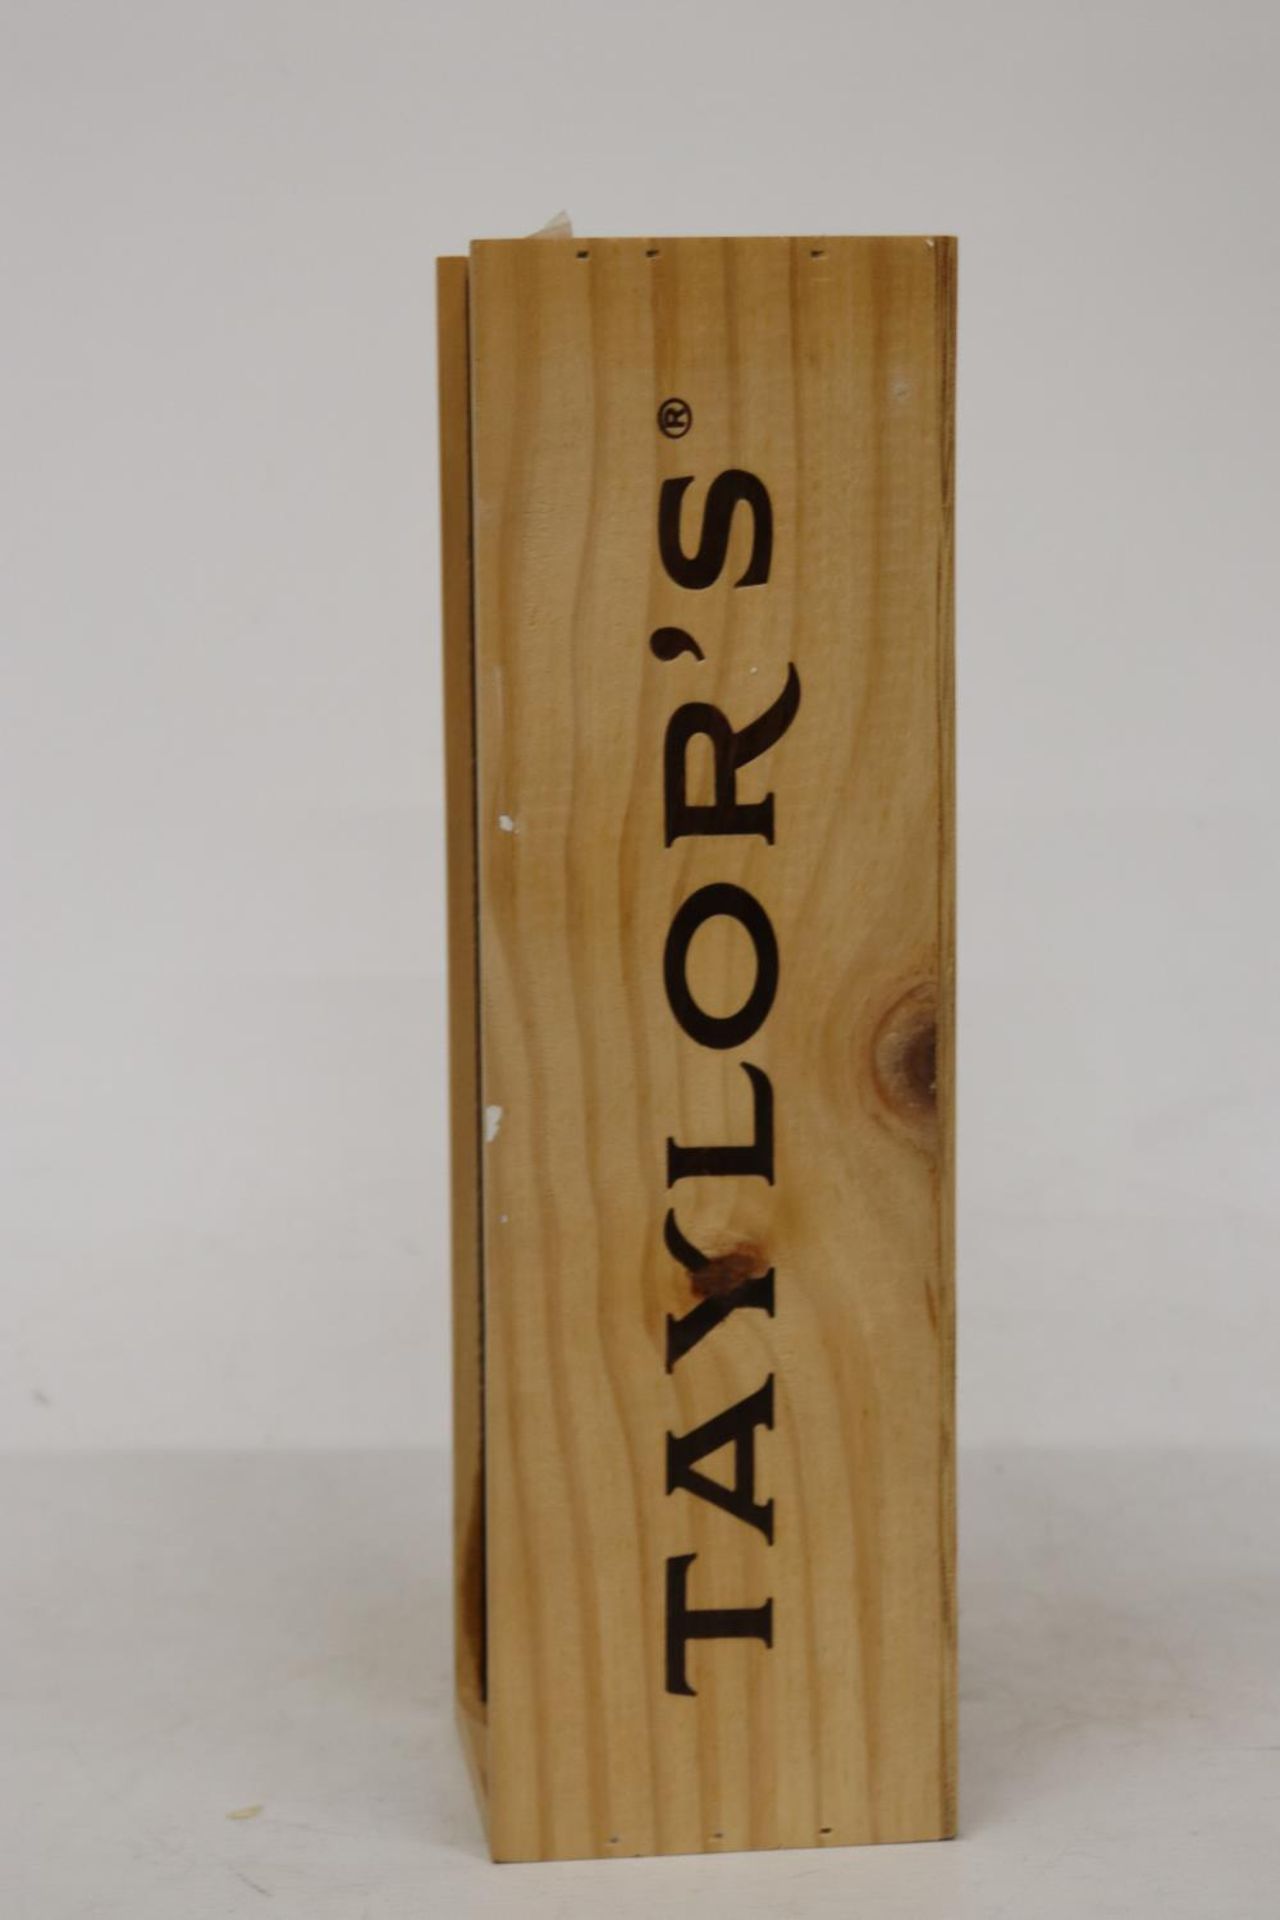 A BOTTLE OF TAYLORS 4XX FIRST ESTATE RESERVE PORT - Image 3 of 5